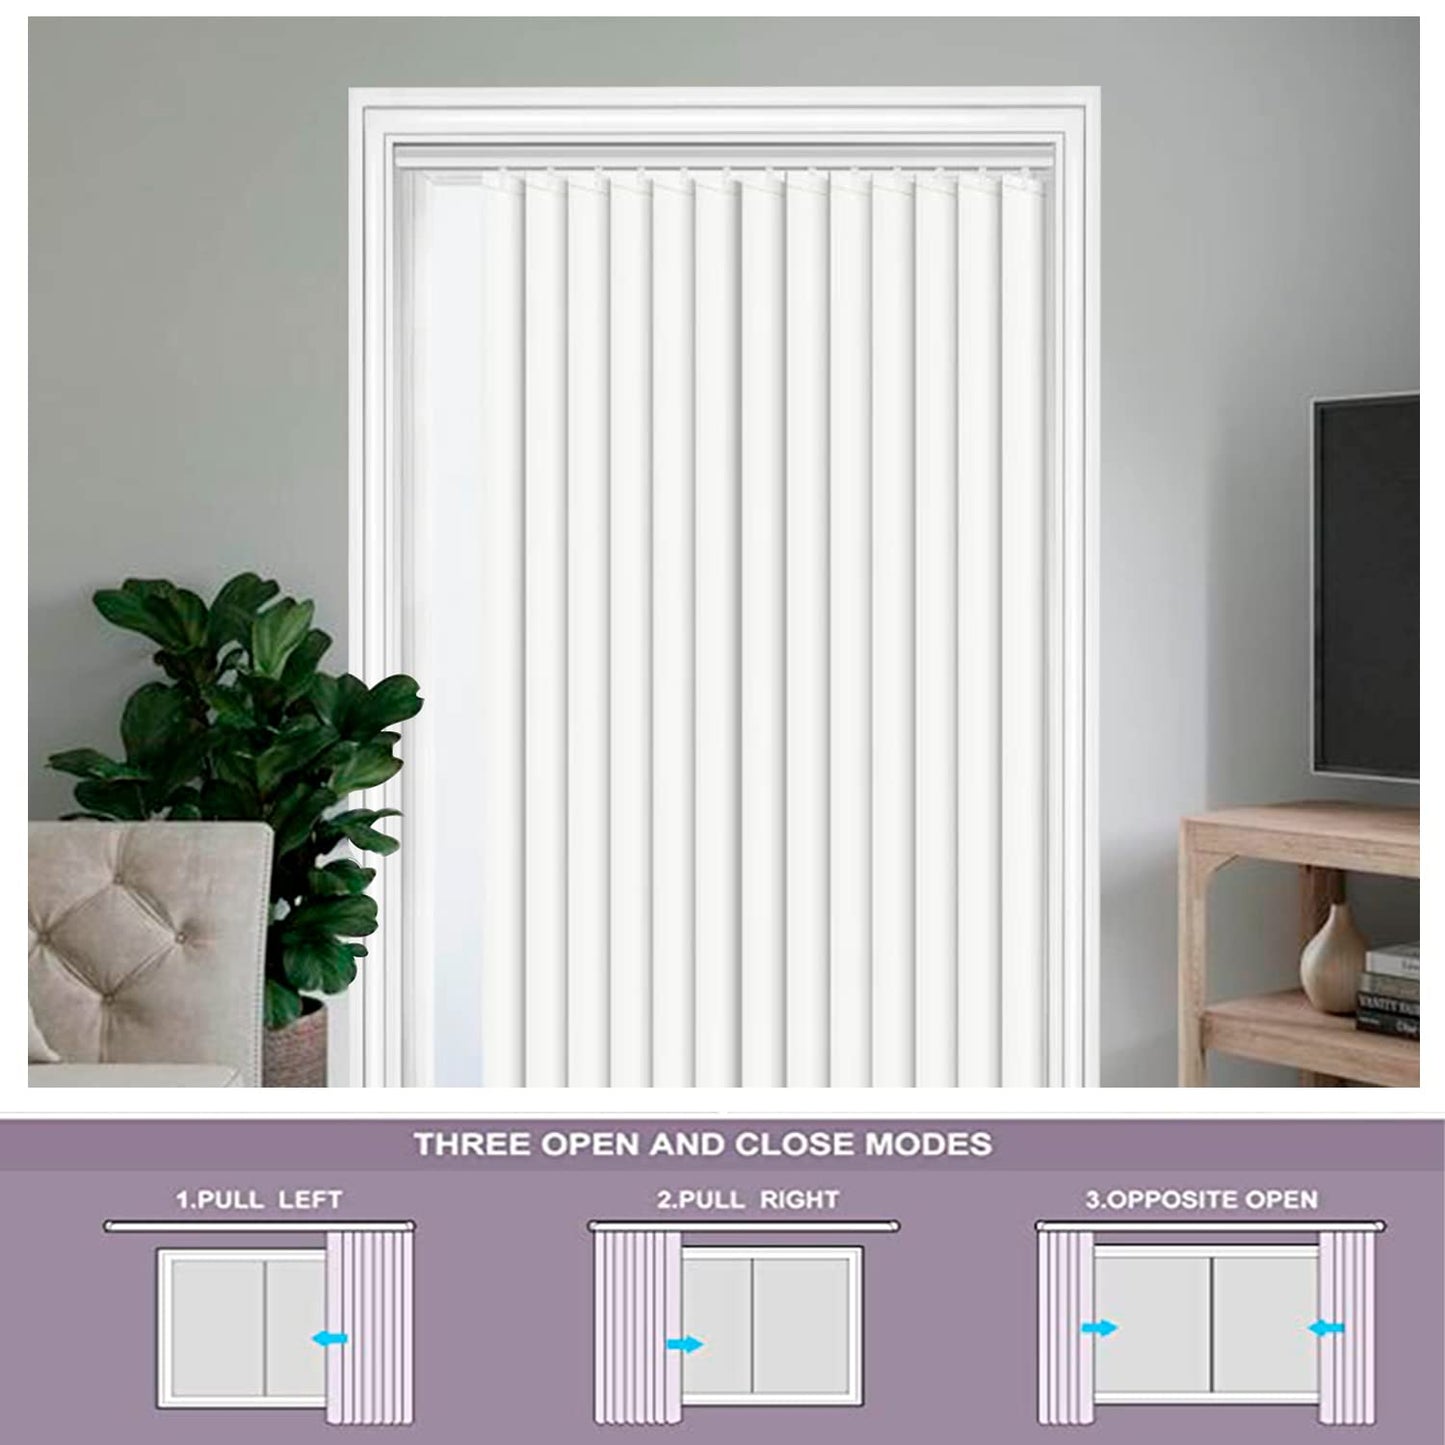 Kayra Decor Vertical Blinds for Windows - Vertical Blinds Curtain for Home - Bedroom, Kitchen, Sliding Door, and Balcony, Customized Size, White